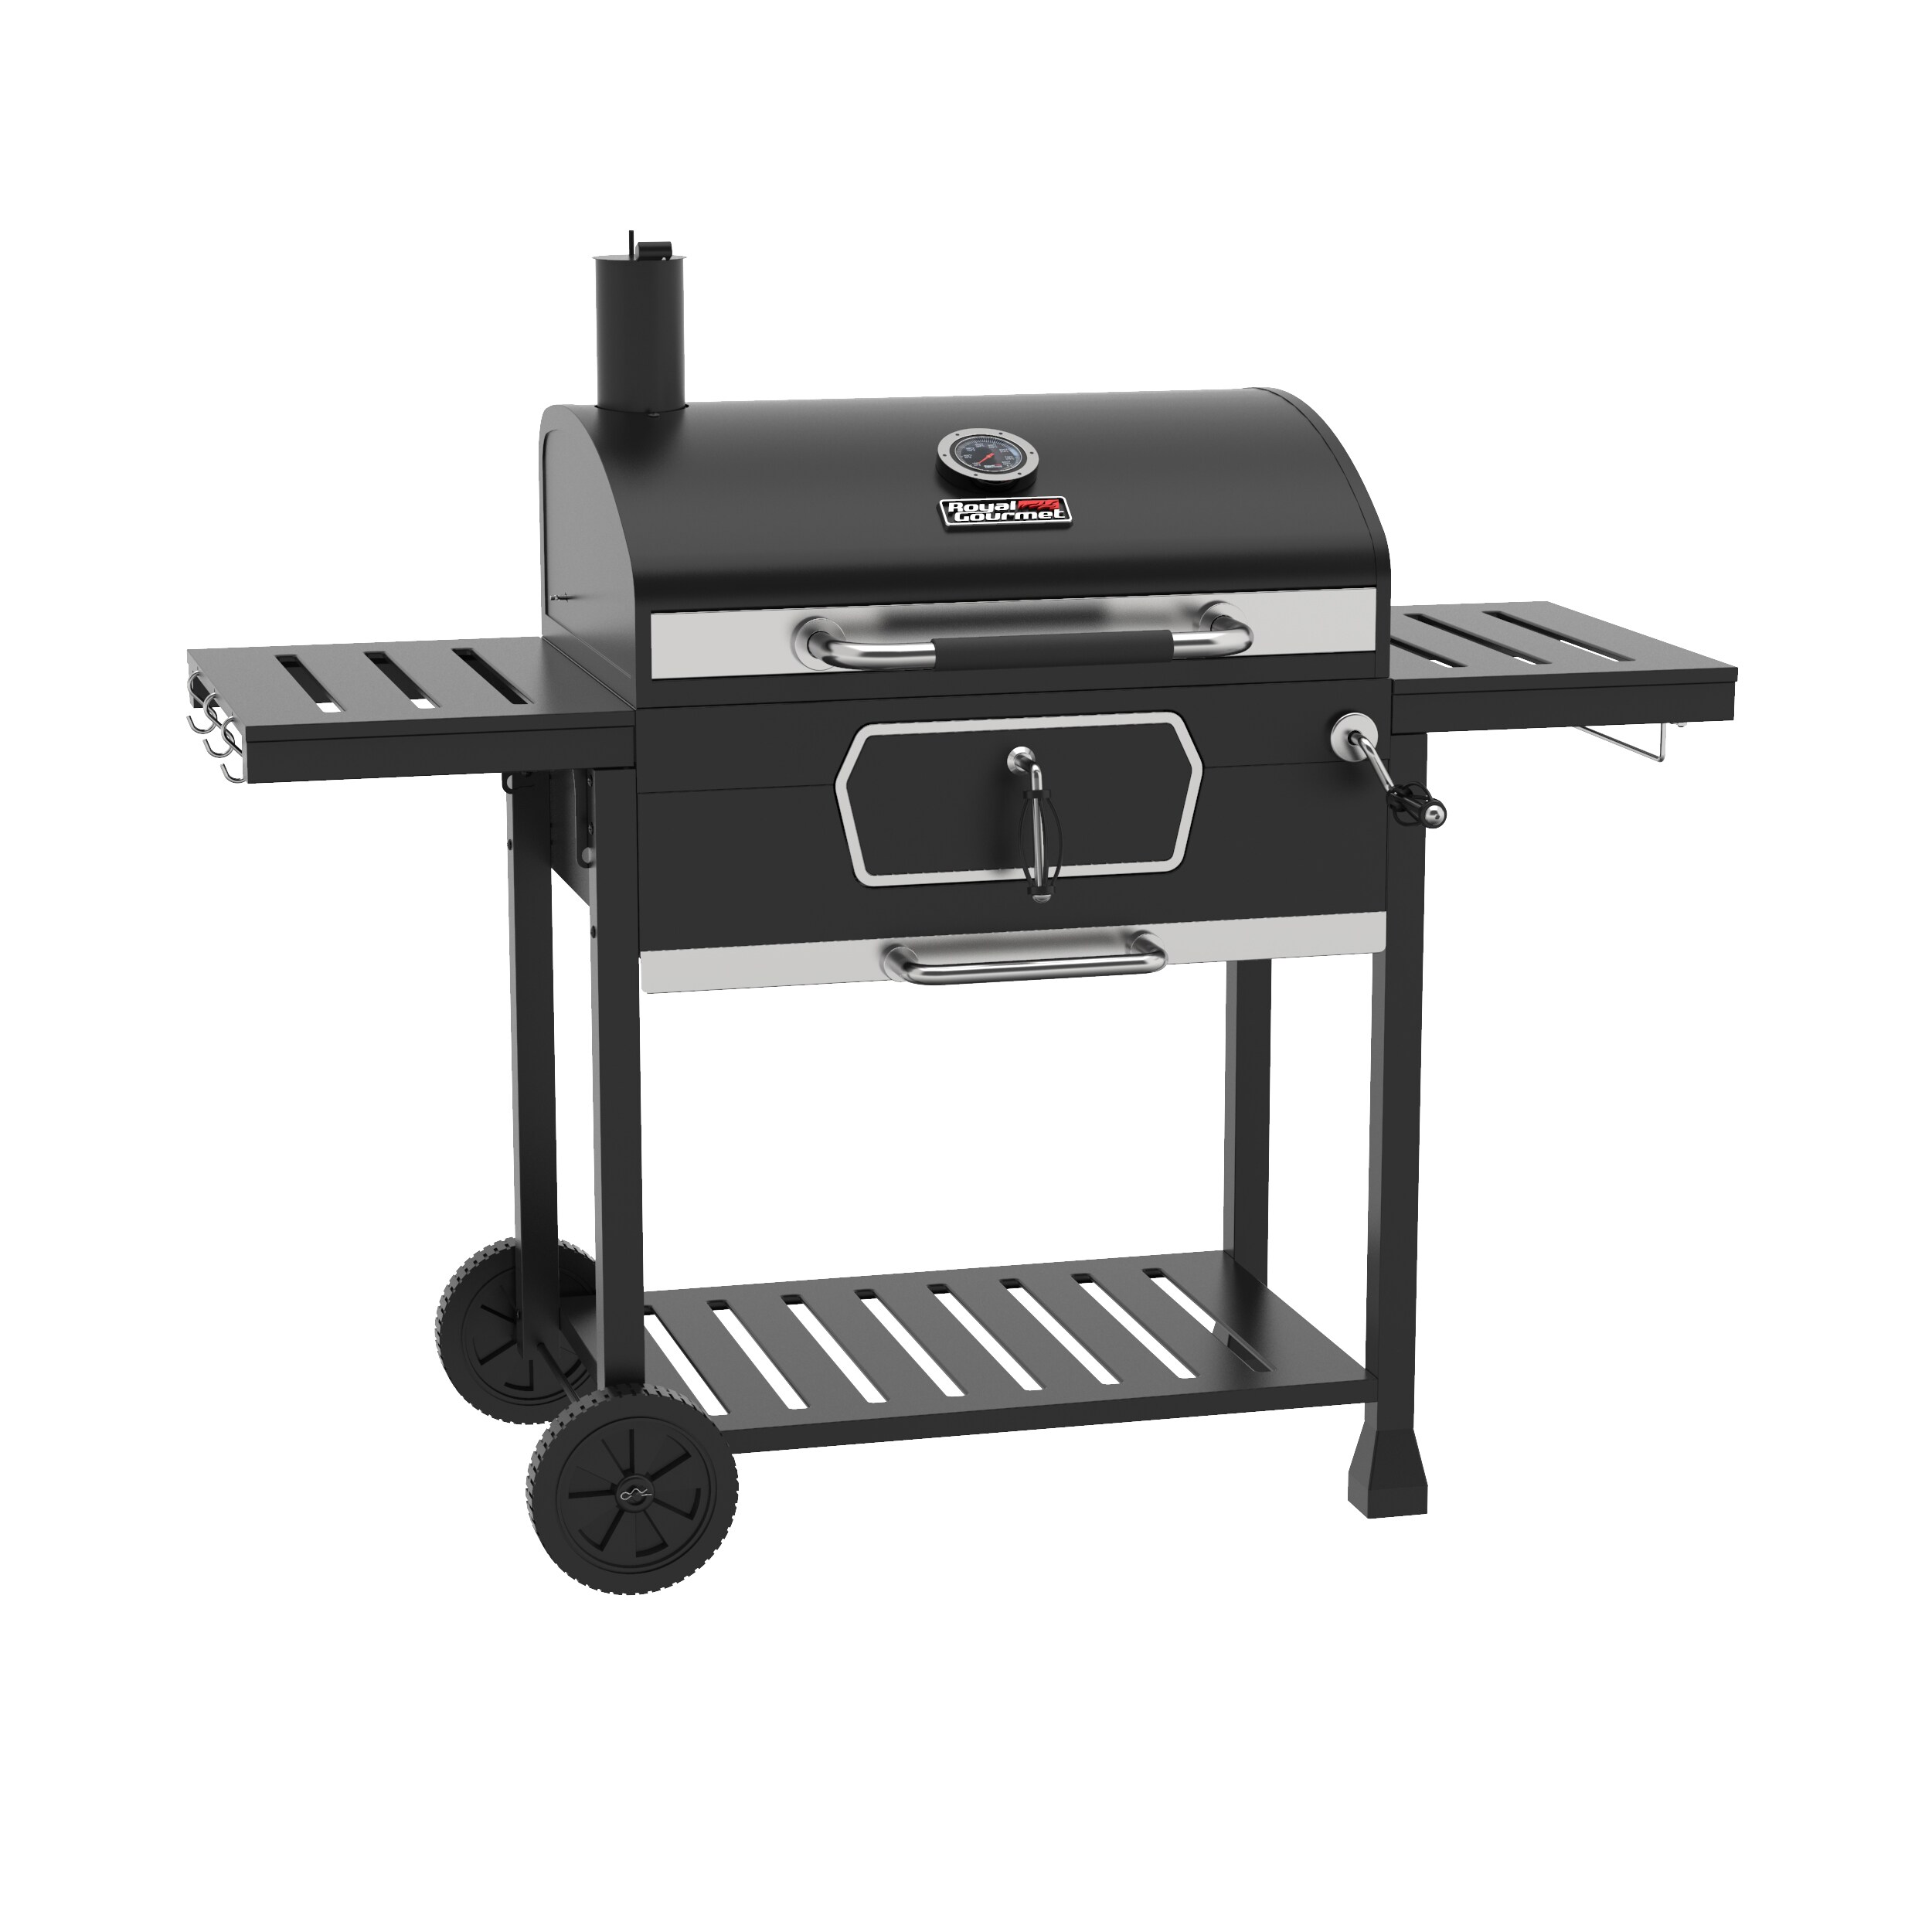 syre argument hundrede Royal Gourmet 30-in W Black Charcoal Grill in the Charcoal Grills  department at Lowes.com